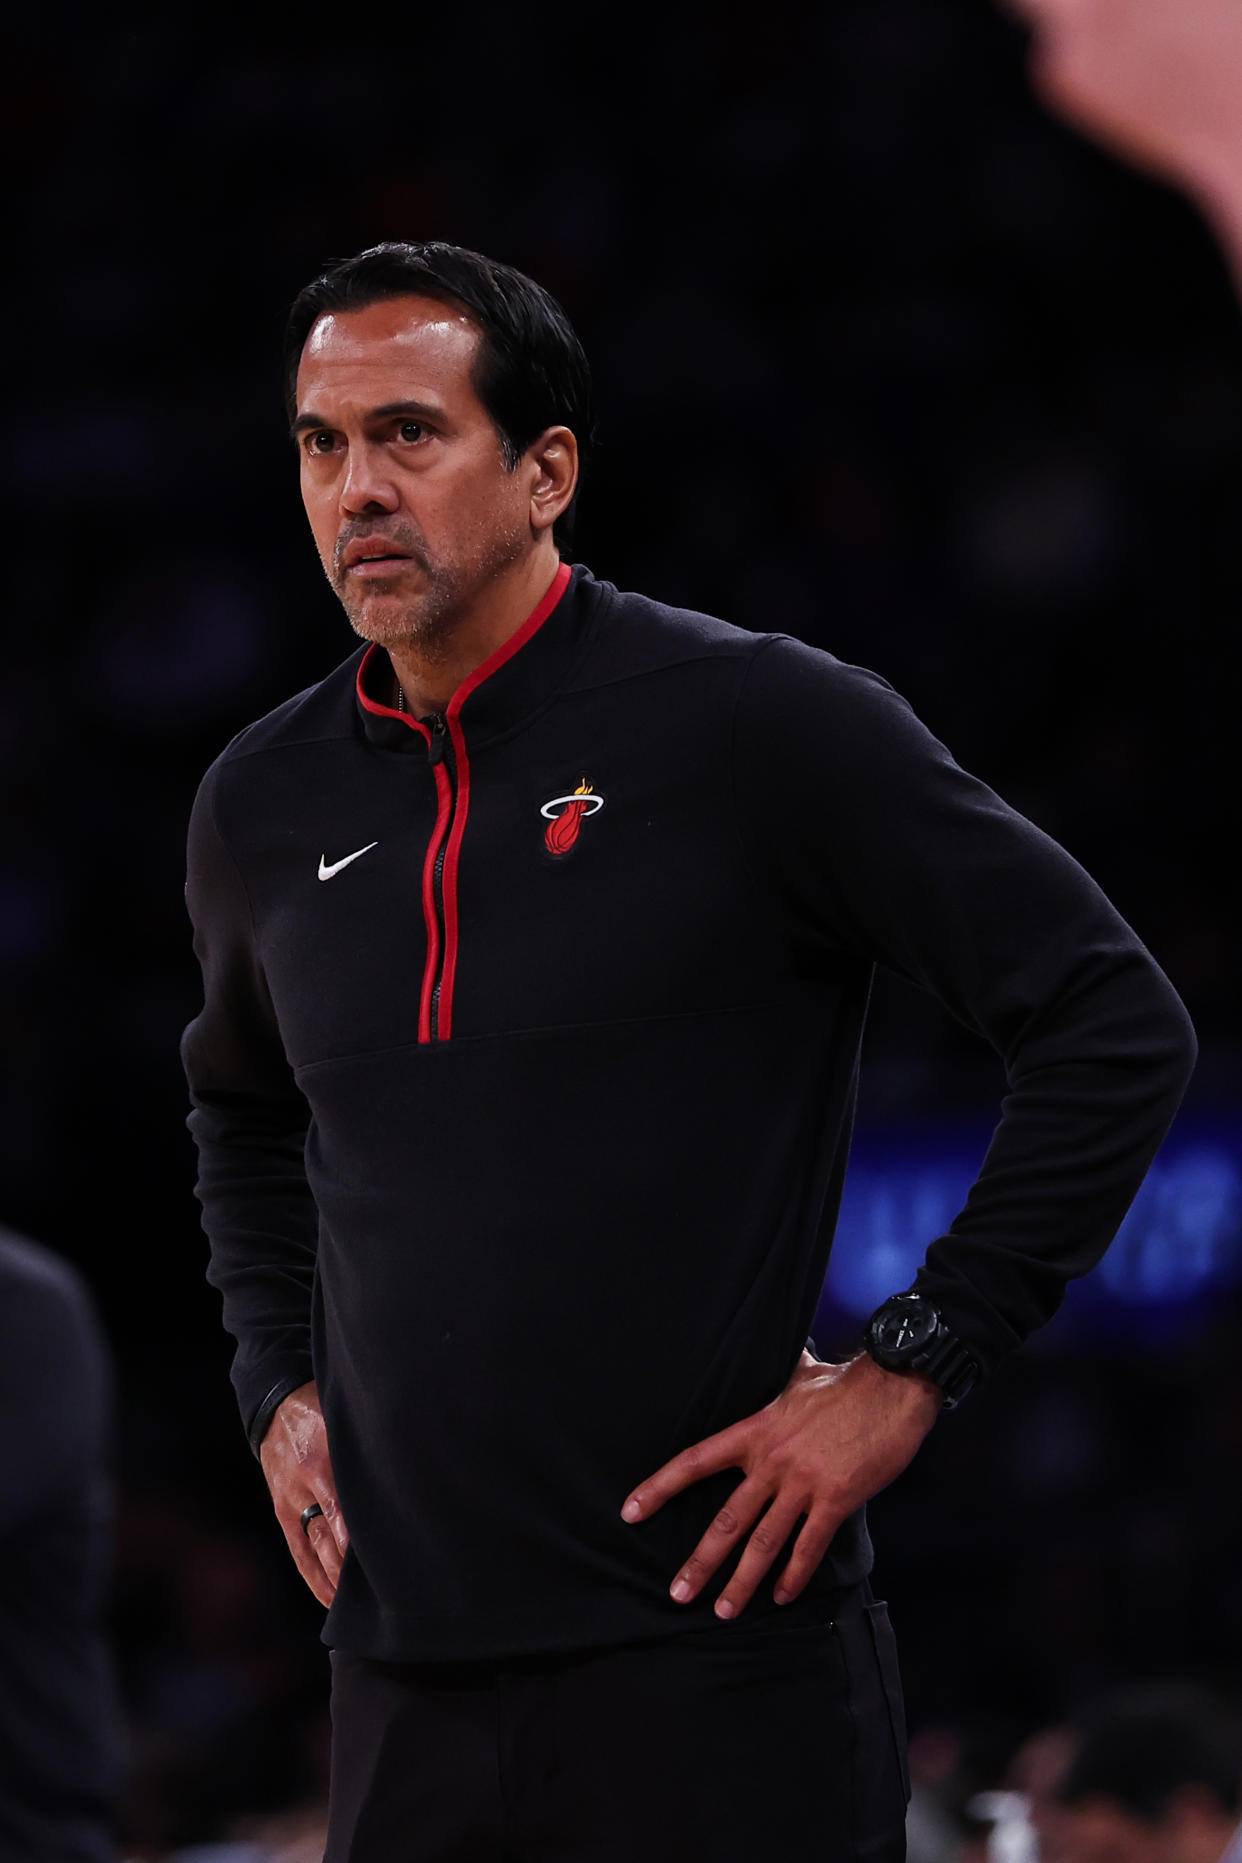 Miami Heat head coach Erik Spoelstra could pull off the greatest single-season coaching job if he can lead a No. 8 seed past both No. 1 seeds en route to a title. (Dustin Satloff/Getty Images)